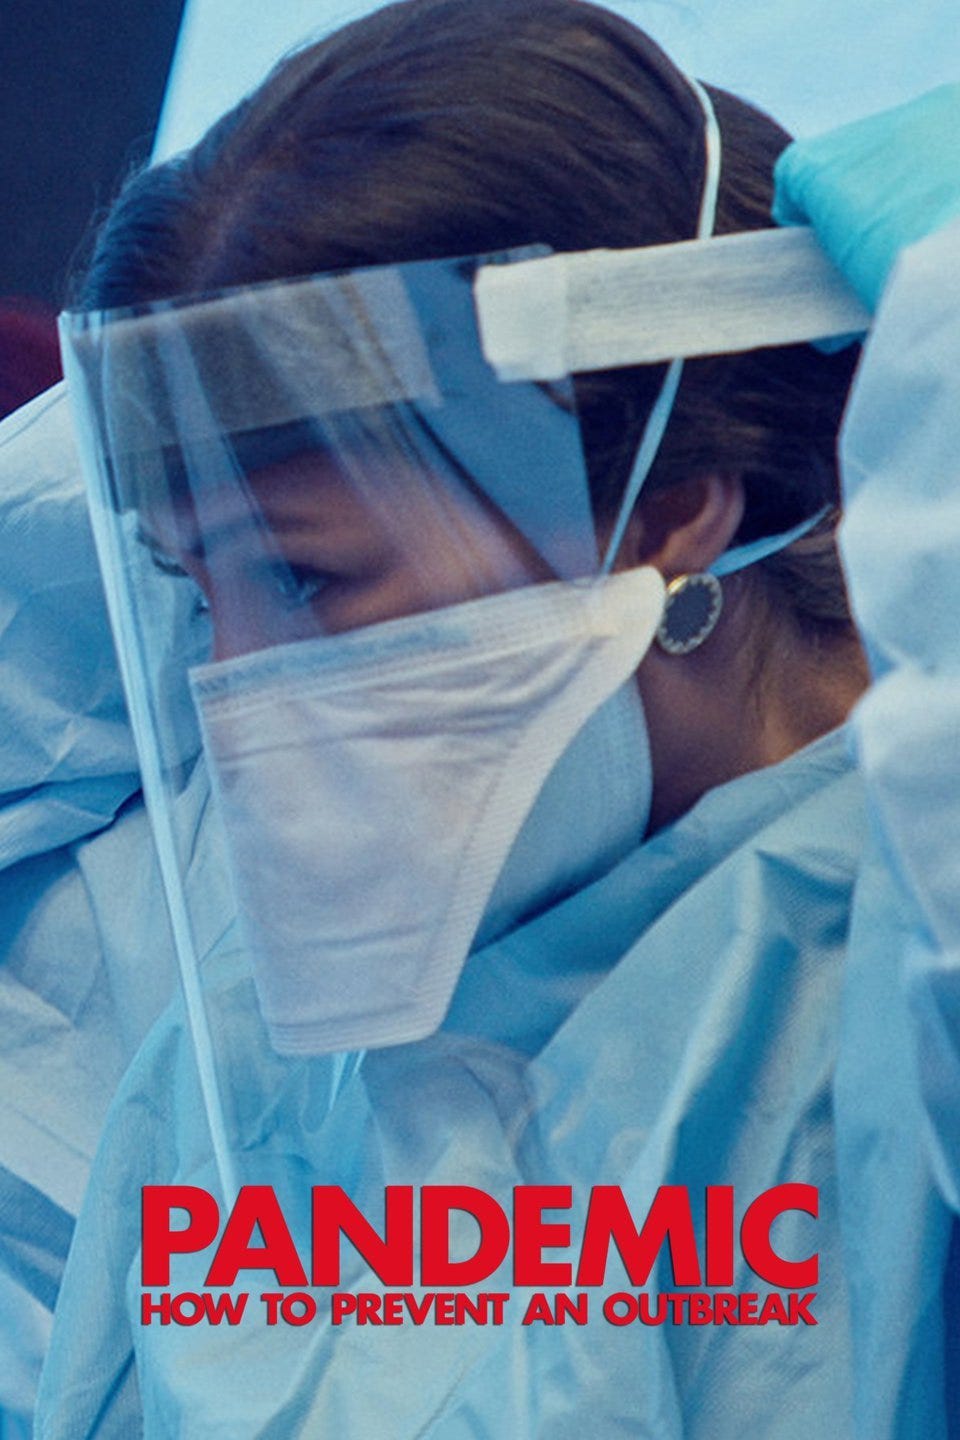 Pandemic: How to Prevent an Outbreak (TV Mini Series 2020) - IMDb